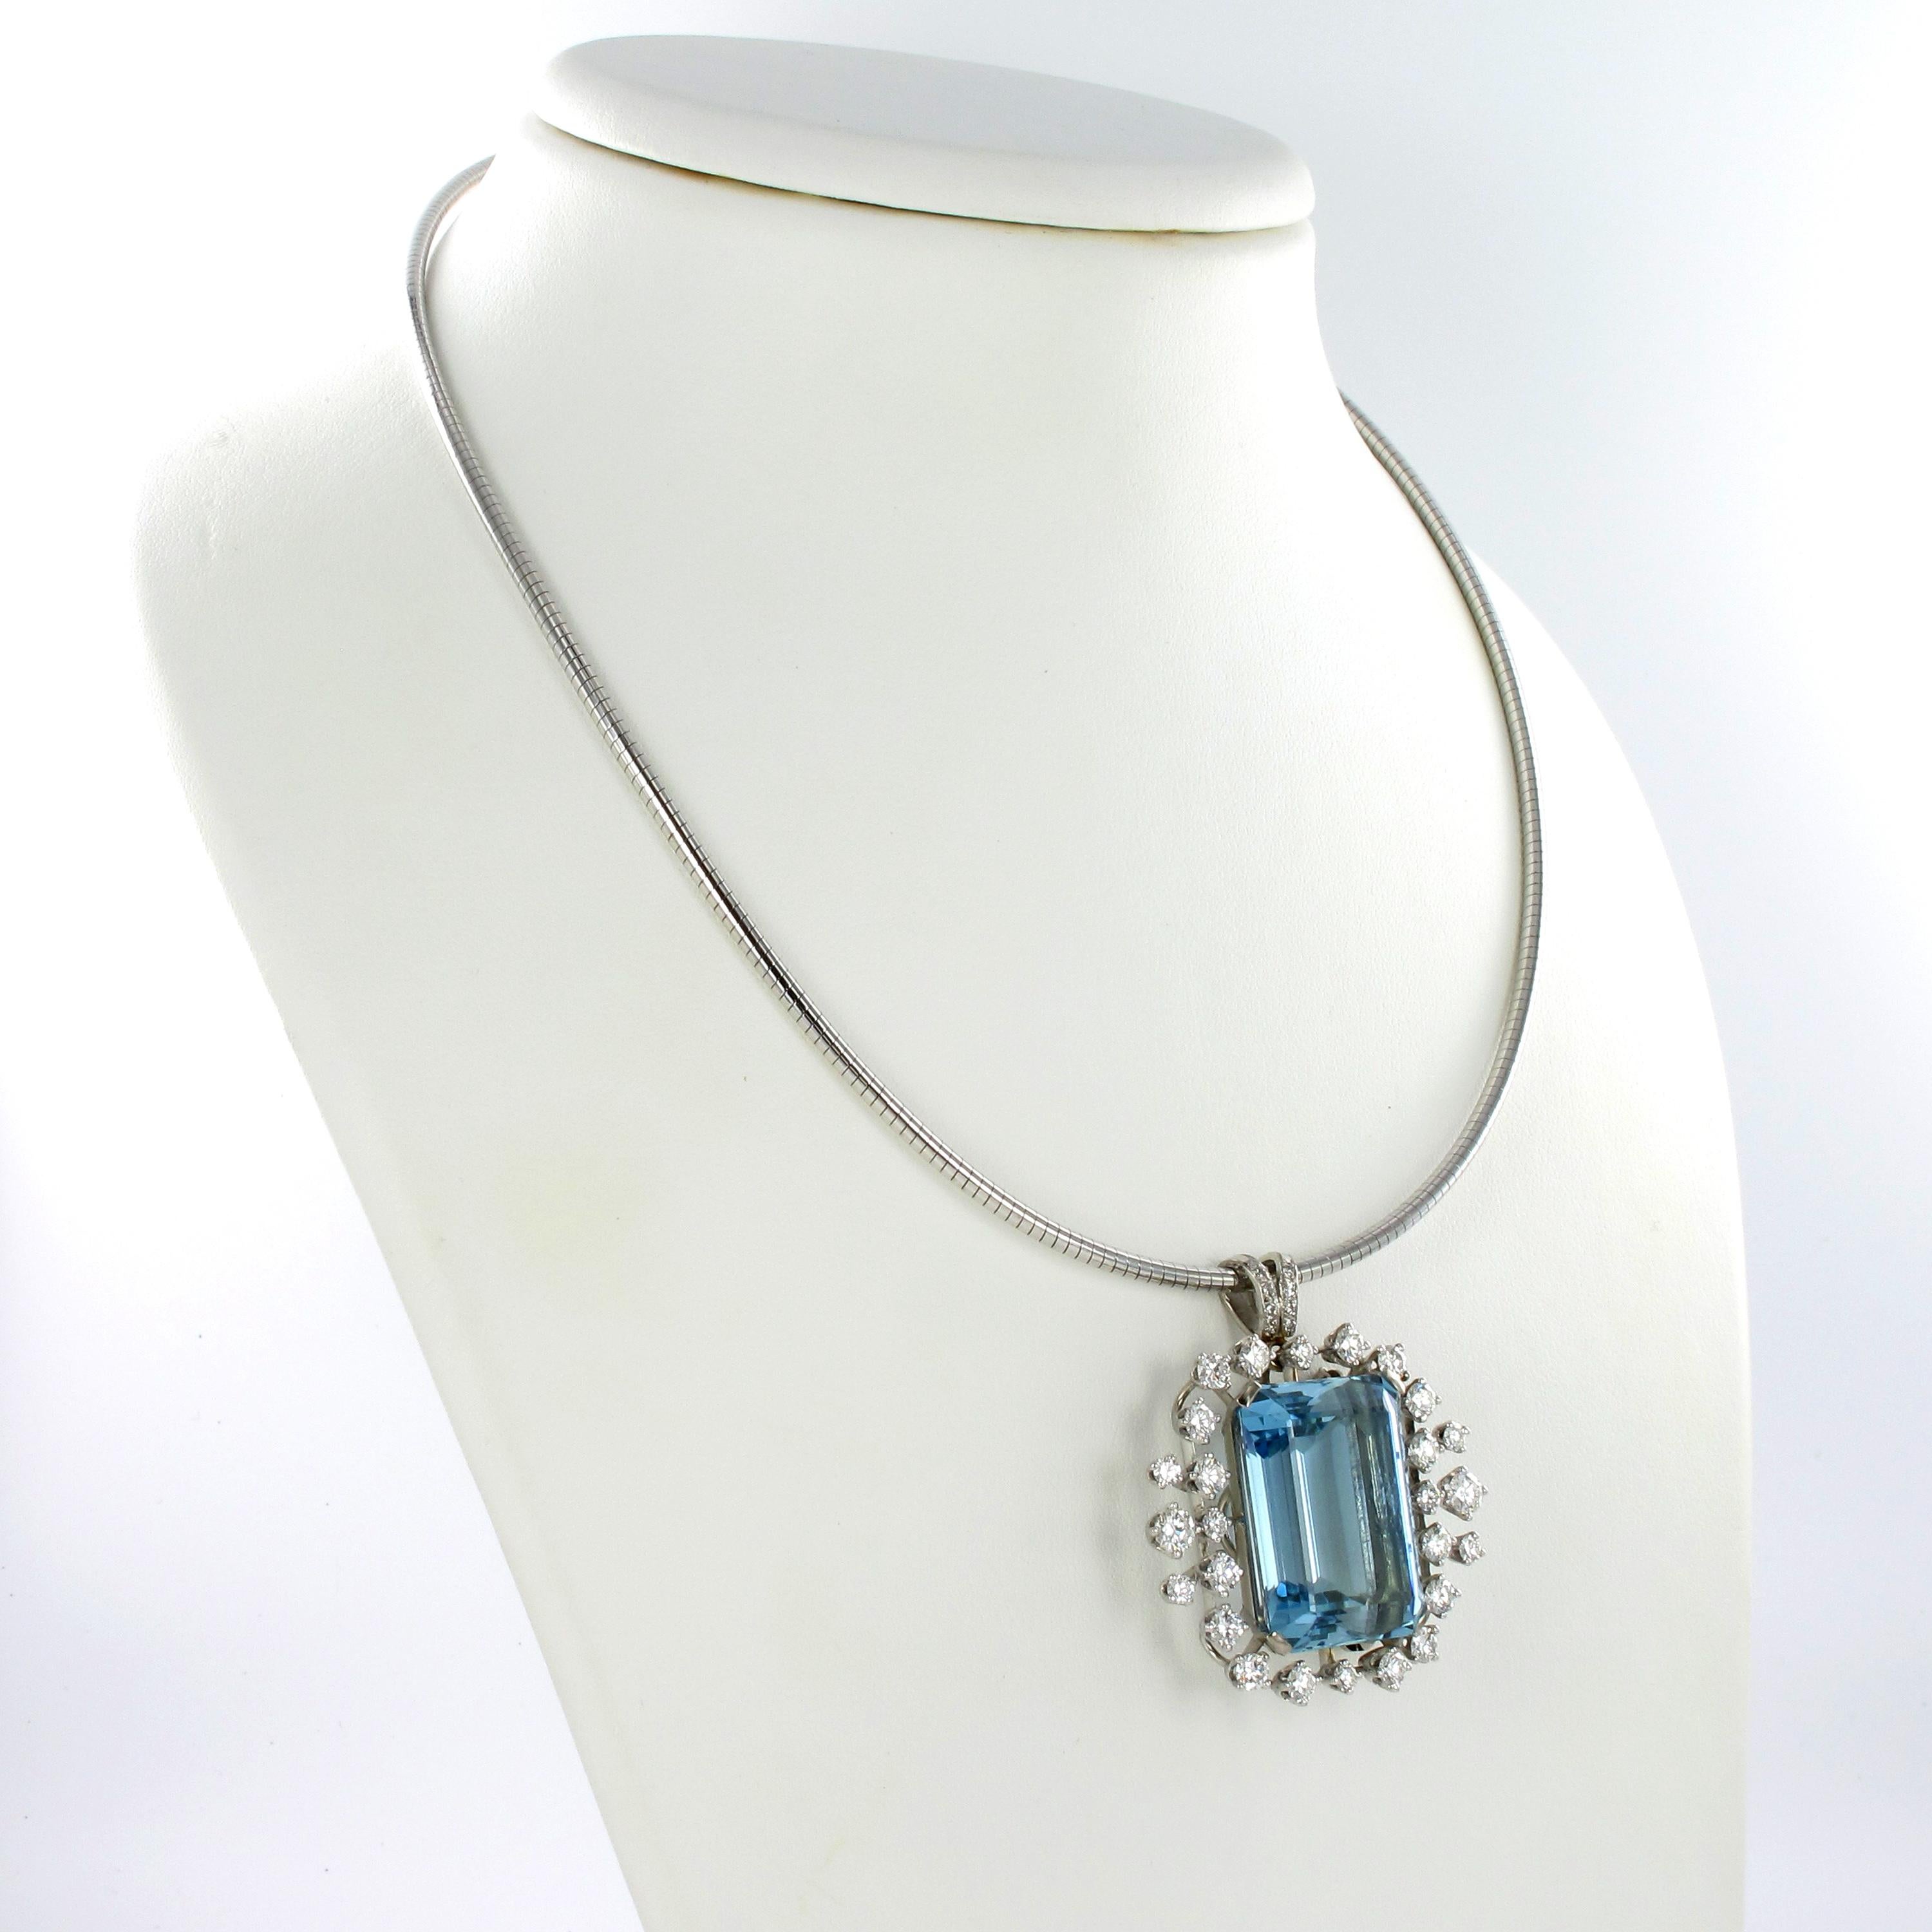 This beautiful pendant/brooch is prong-set with a 35.00 carat emerald-cut Aquamarine. Clean and of delightful colour, this lively aquamarine is surrounded by 26 brilliant-cut diamonds of G/H colour and vs clarity, total weight approximately 3.20